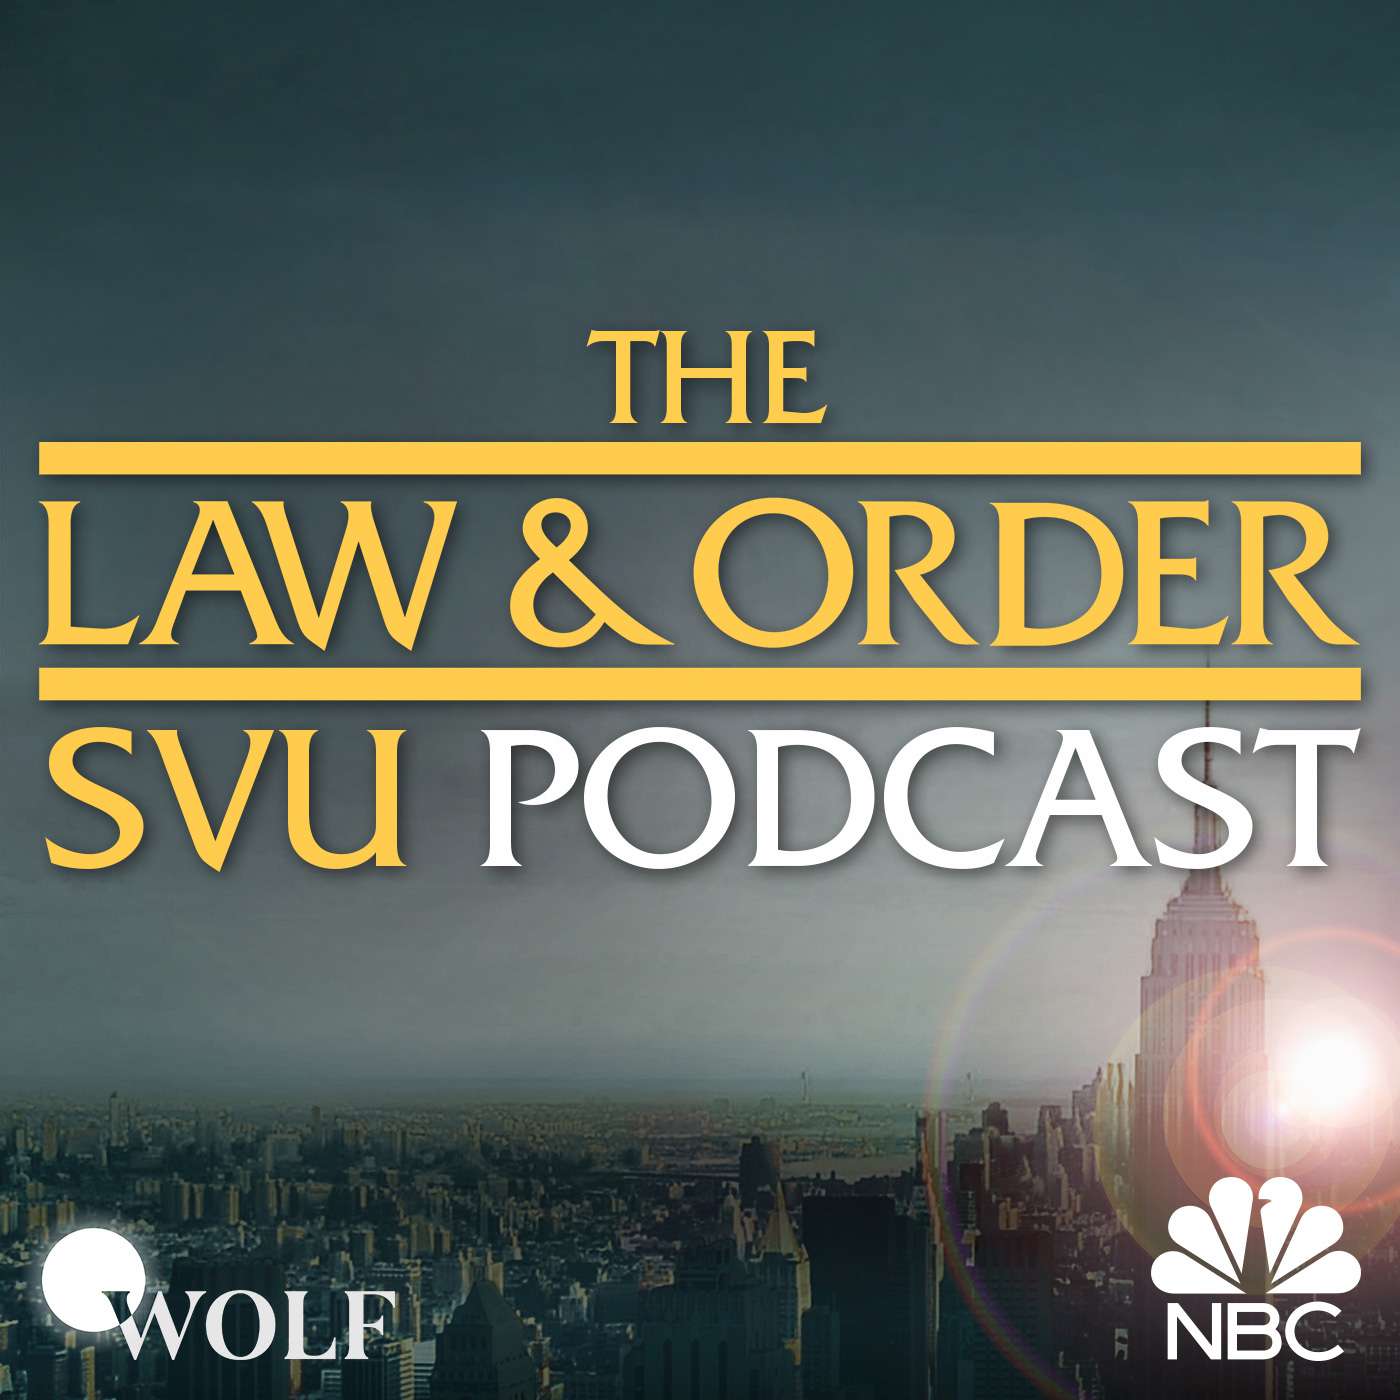 The Law & Order: SVU Podcast